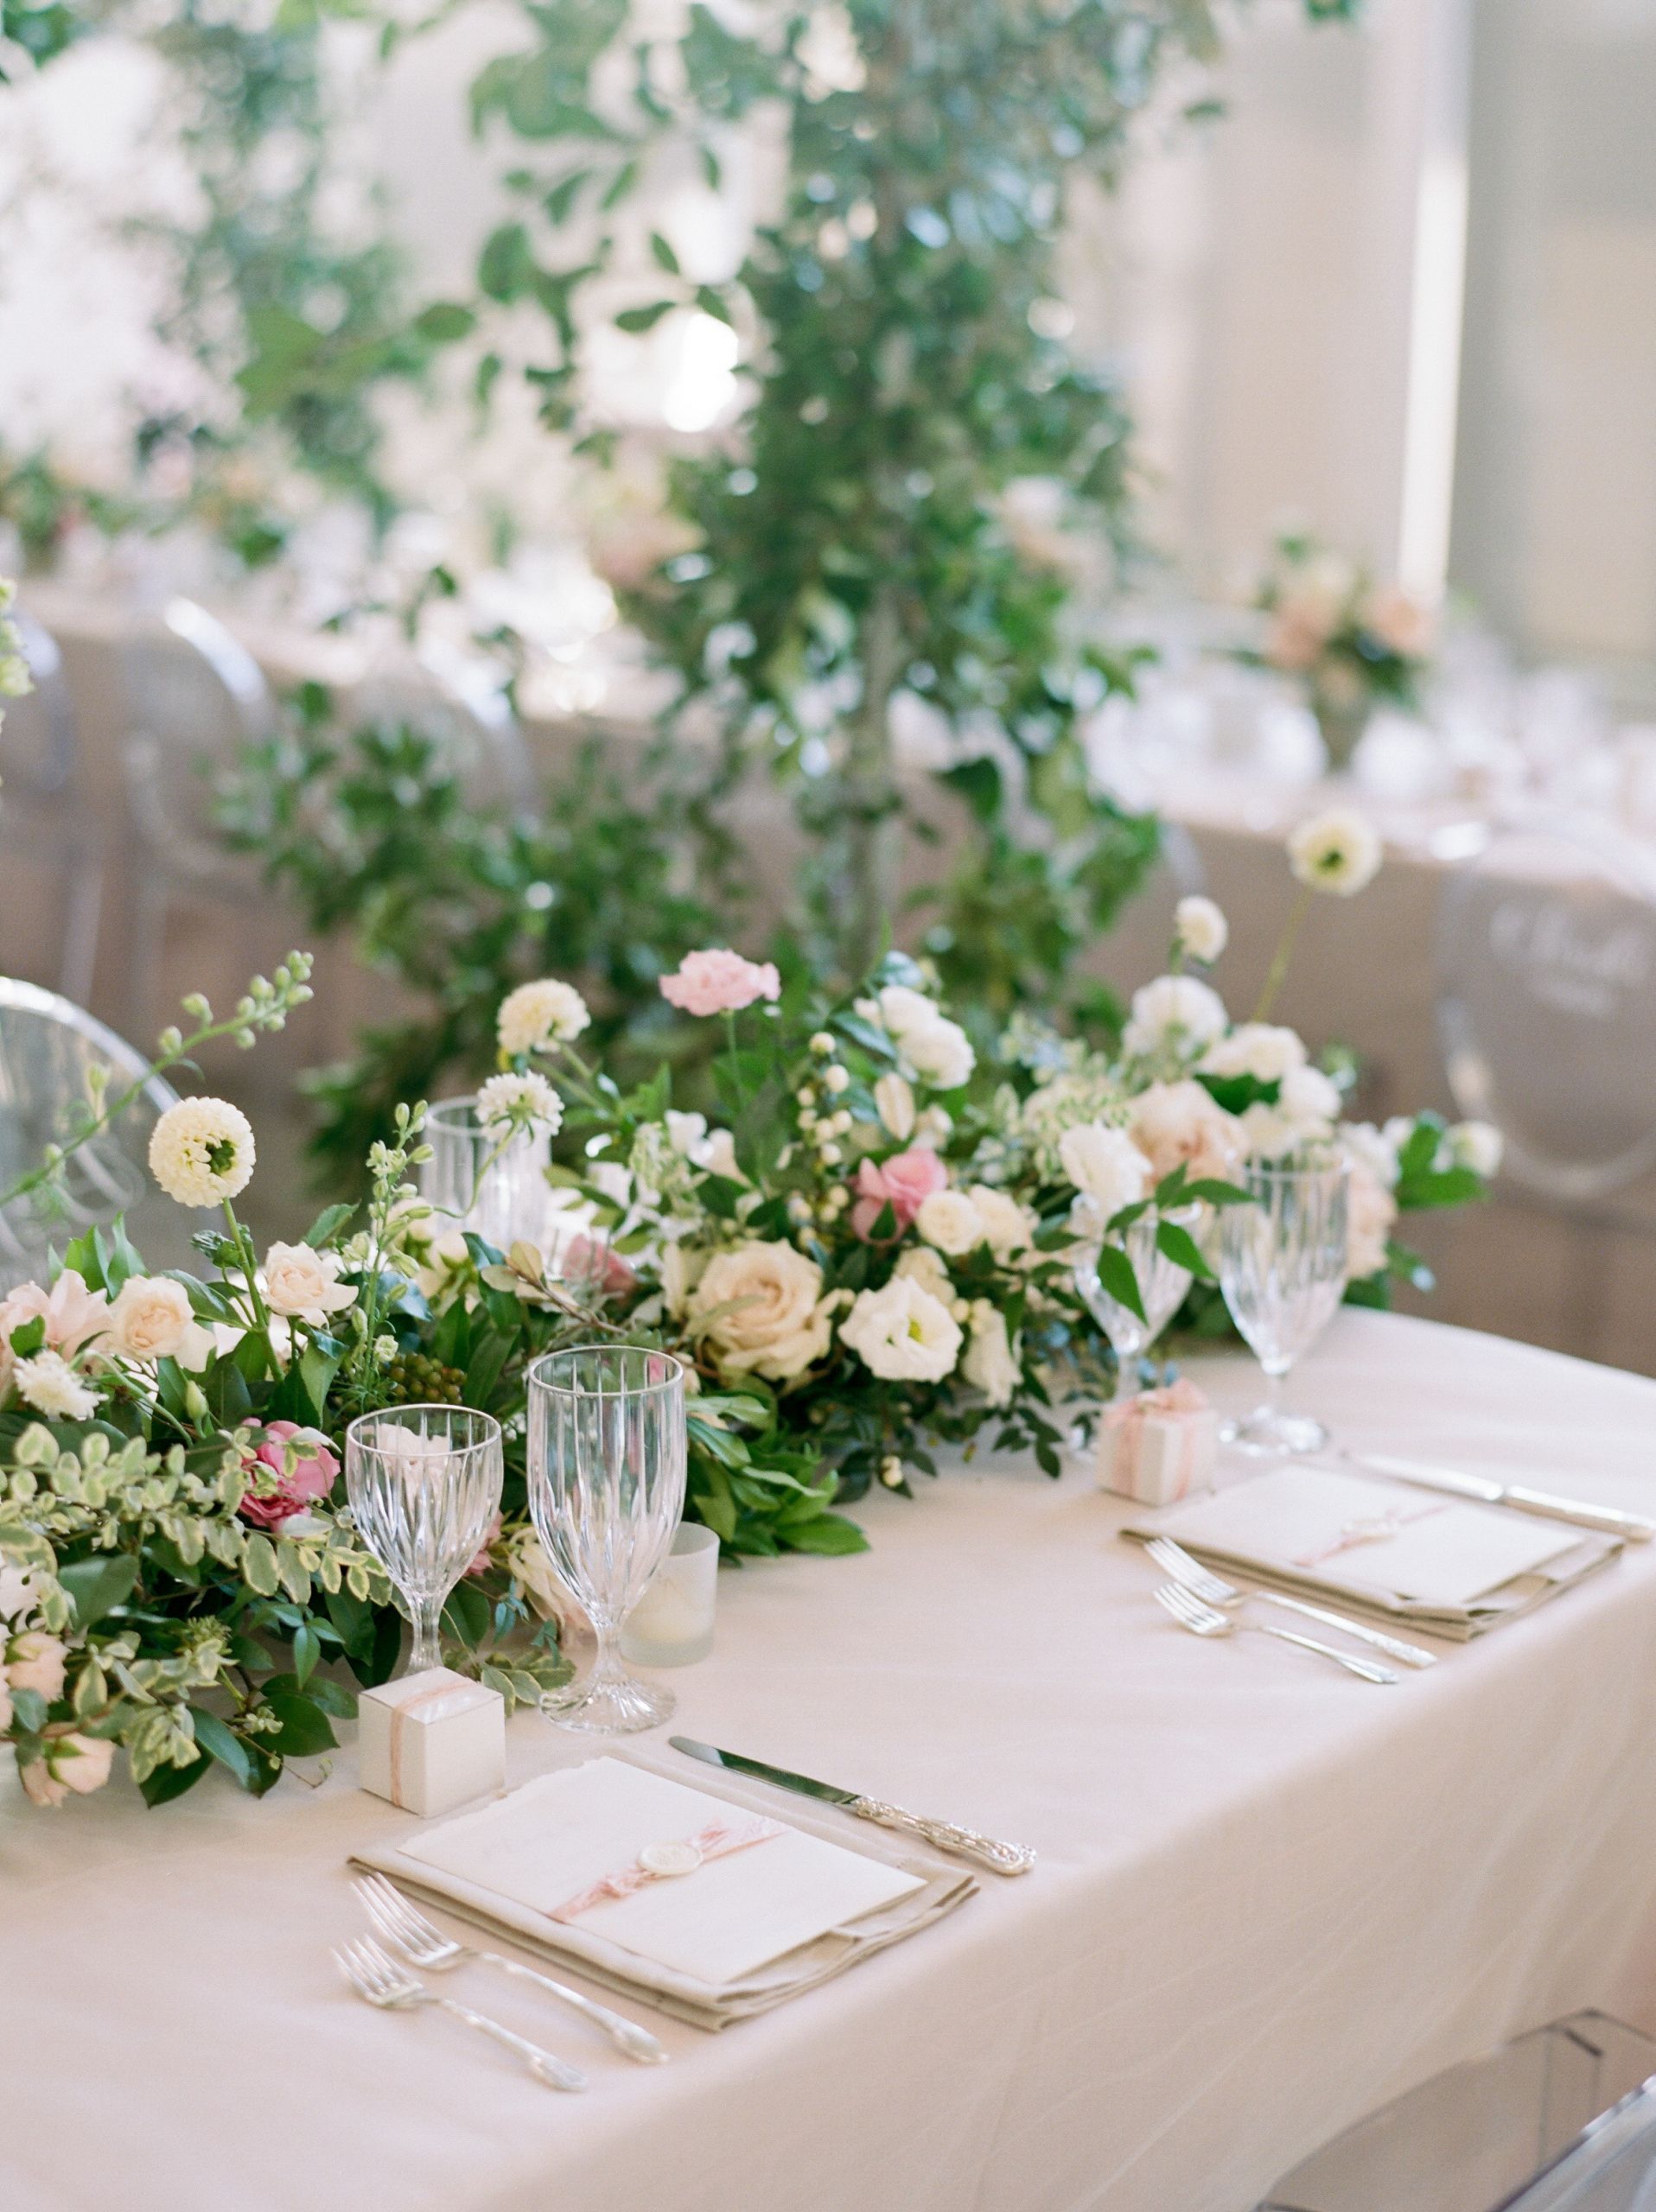 Wedding Table Flowers
 40 of Our Favorite Floral Wedding Centerpieces